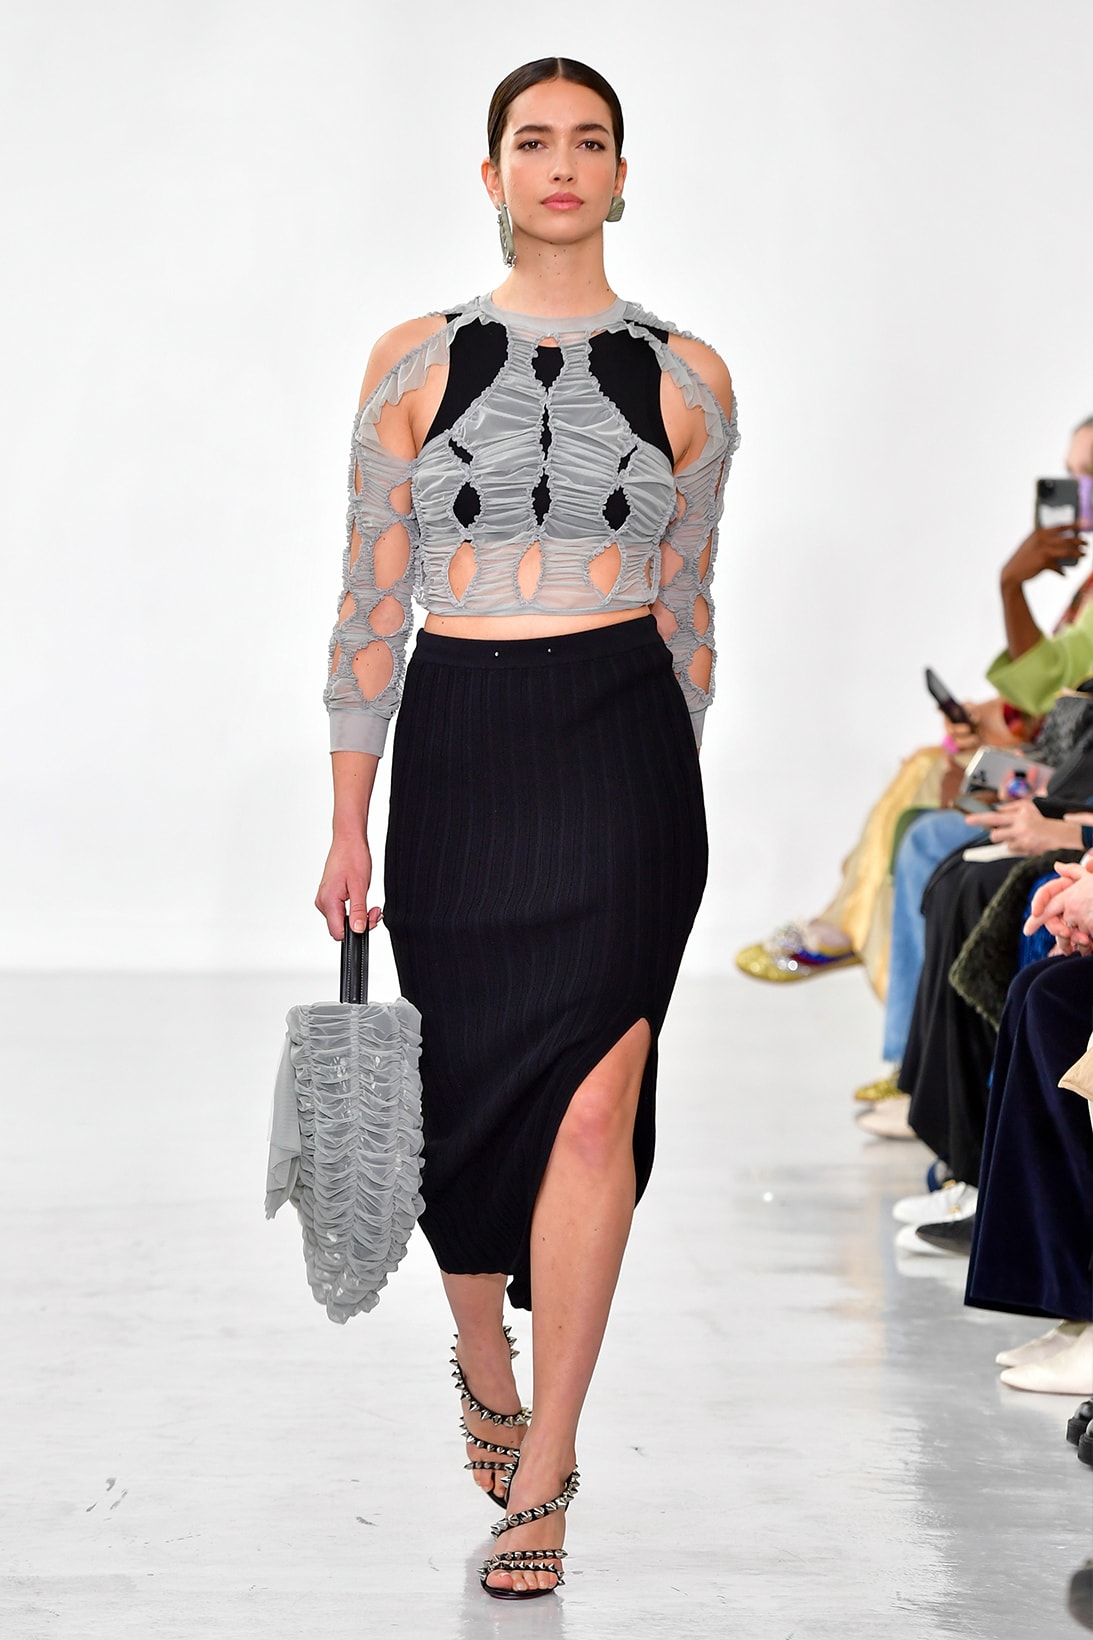 Ester Manas Fall Winter Collection Size Inclusivity Cut-Outs Fashion Week Runway Show Photos Sheared Top Skirt Gray Black